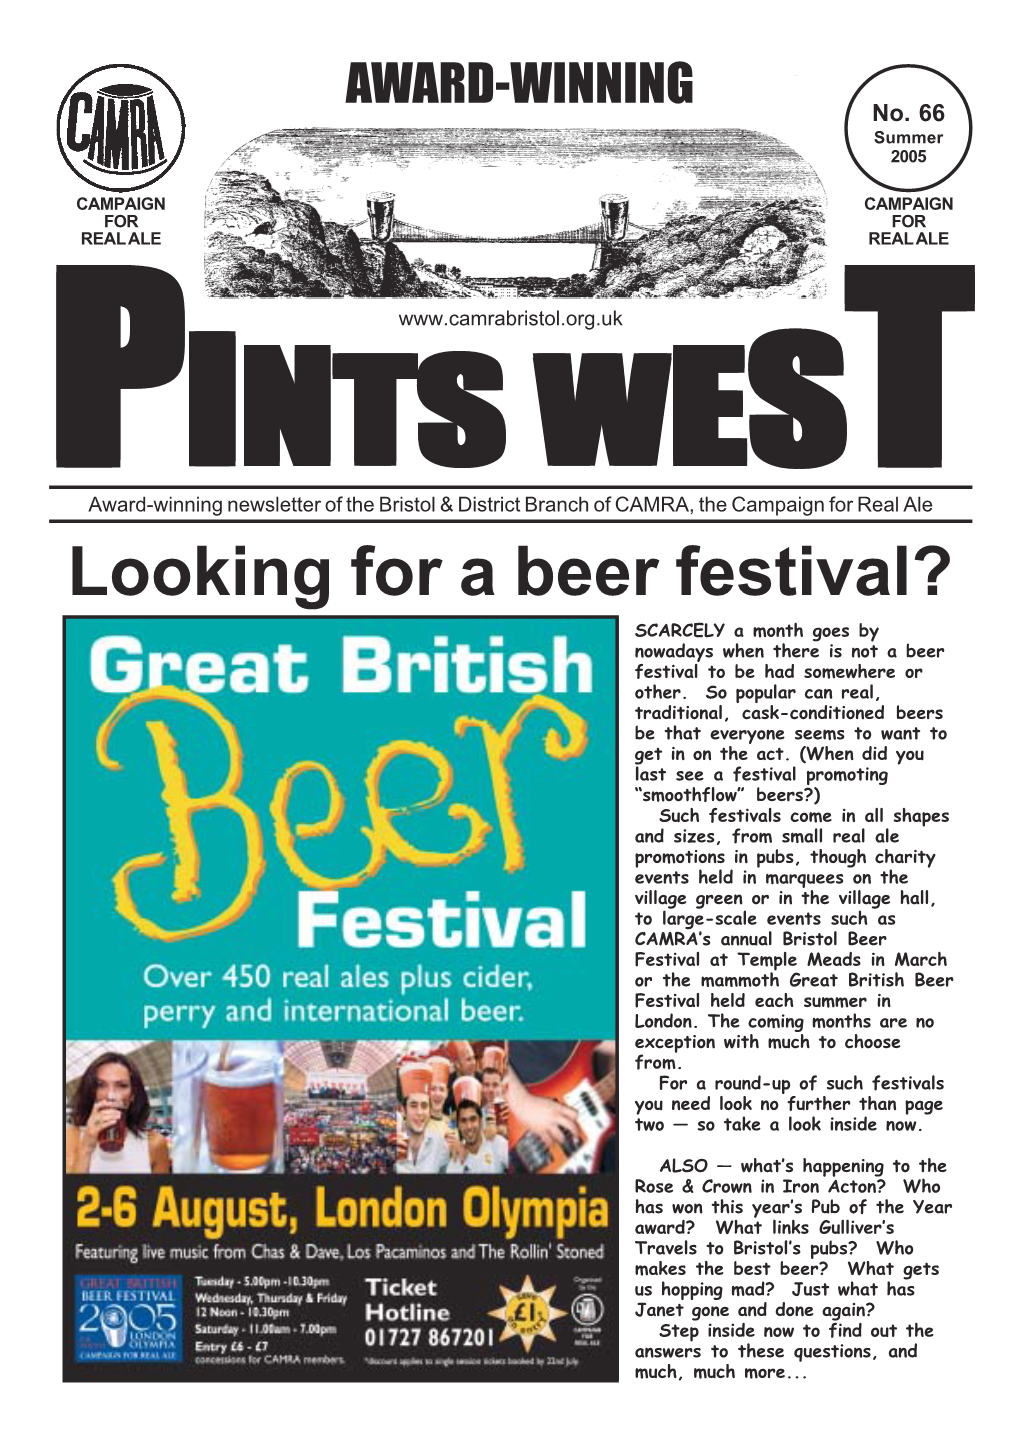 Looking for a Beer Festival? SCARCELY a Month Goes by Nowadays When There Is Not a Beer Festival to Be Had Somewhere Or Other